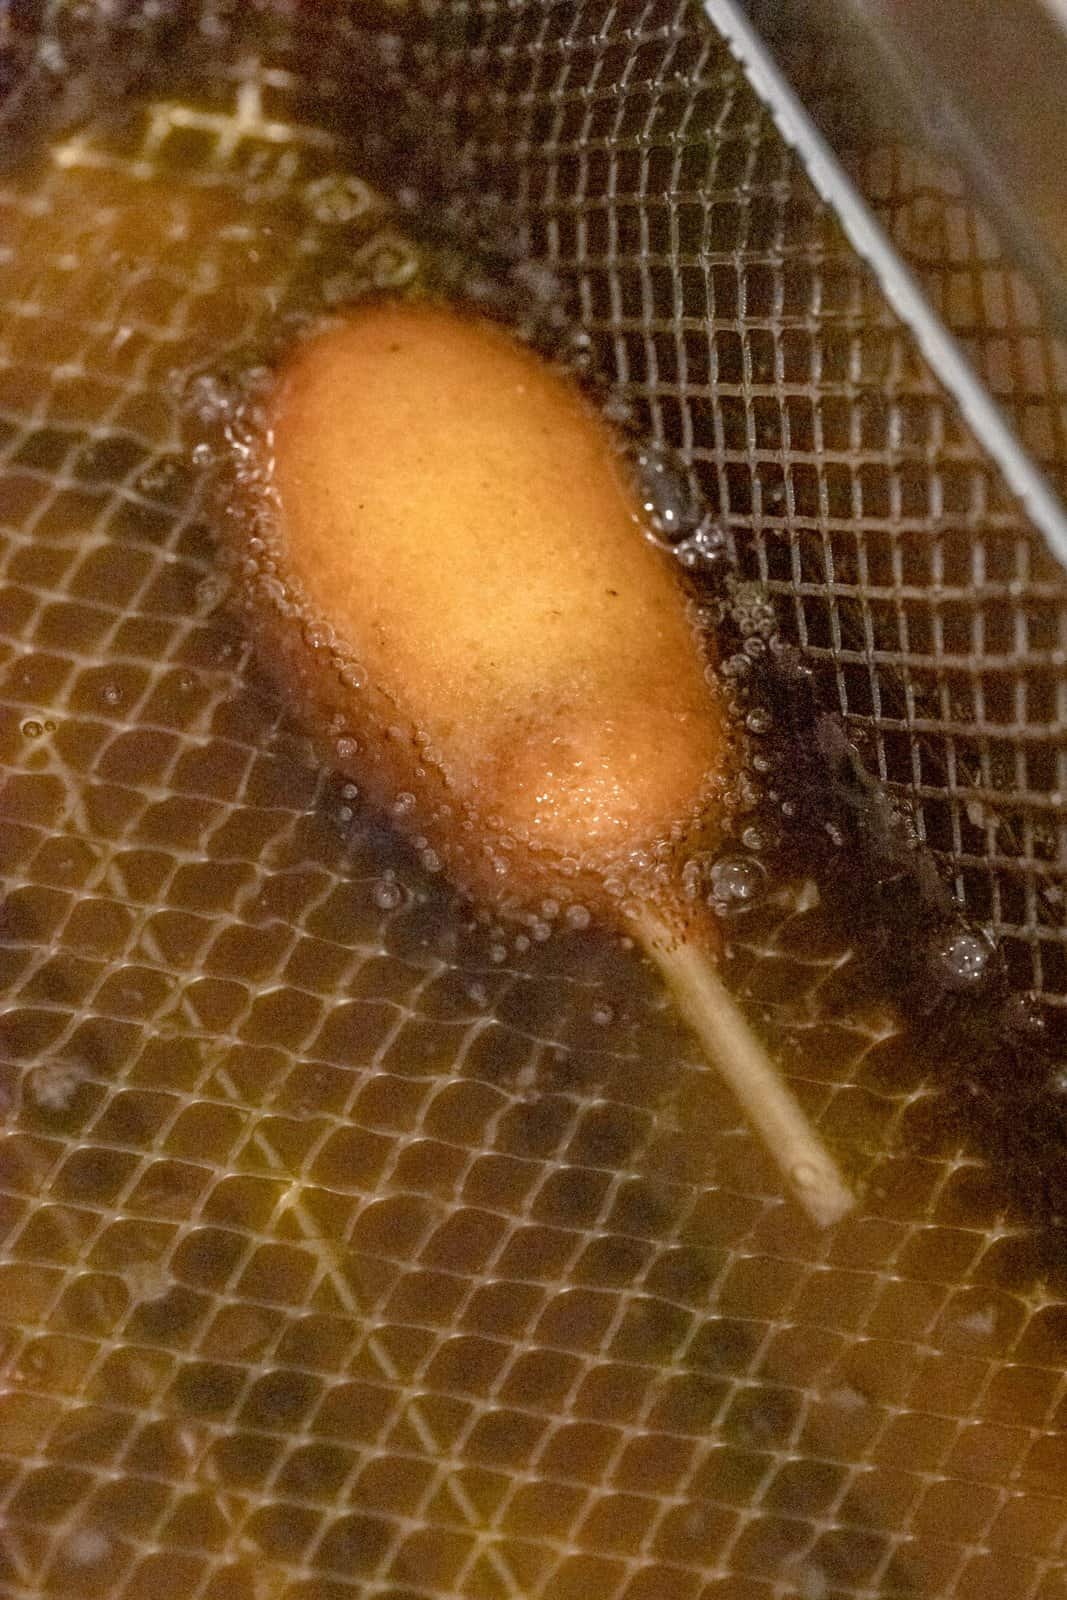 Corn dog placed in oil frying.